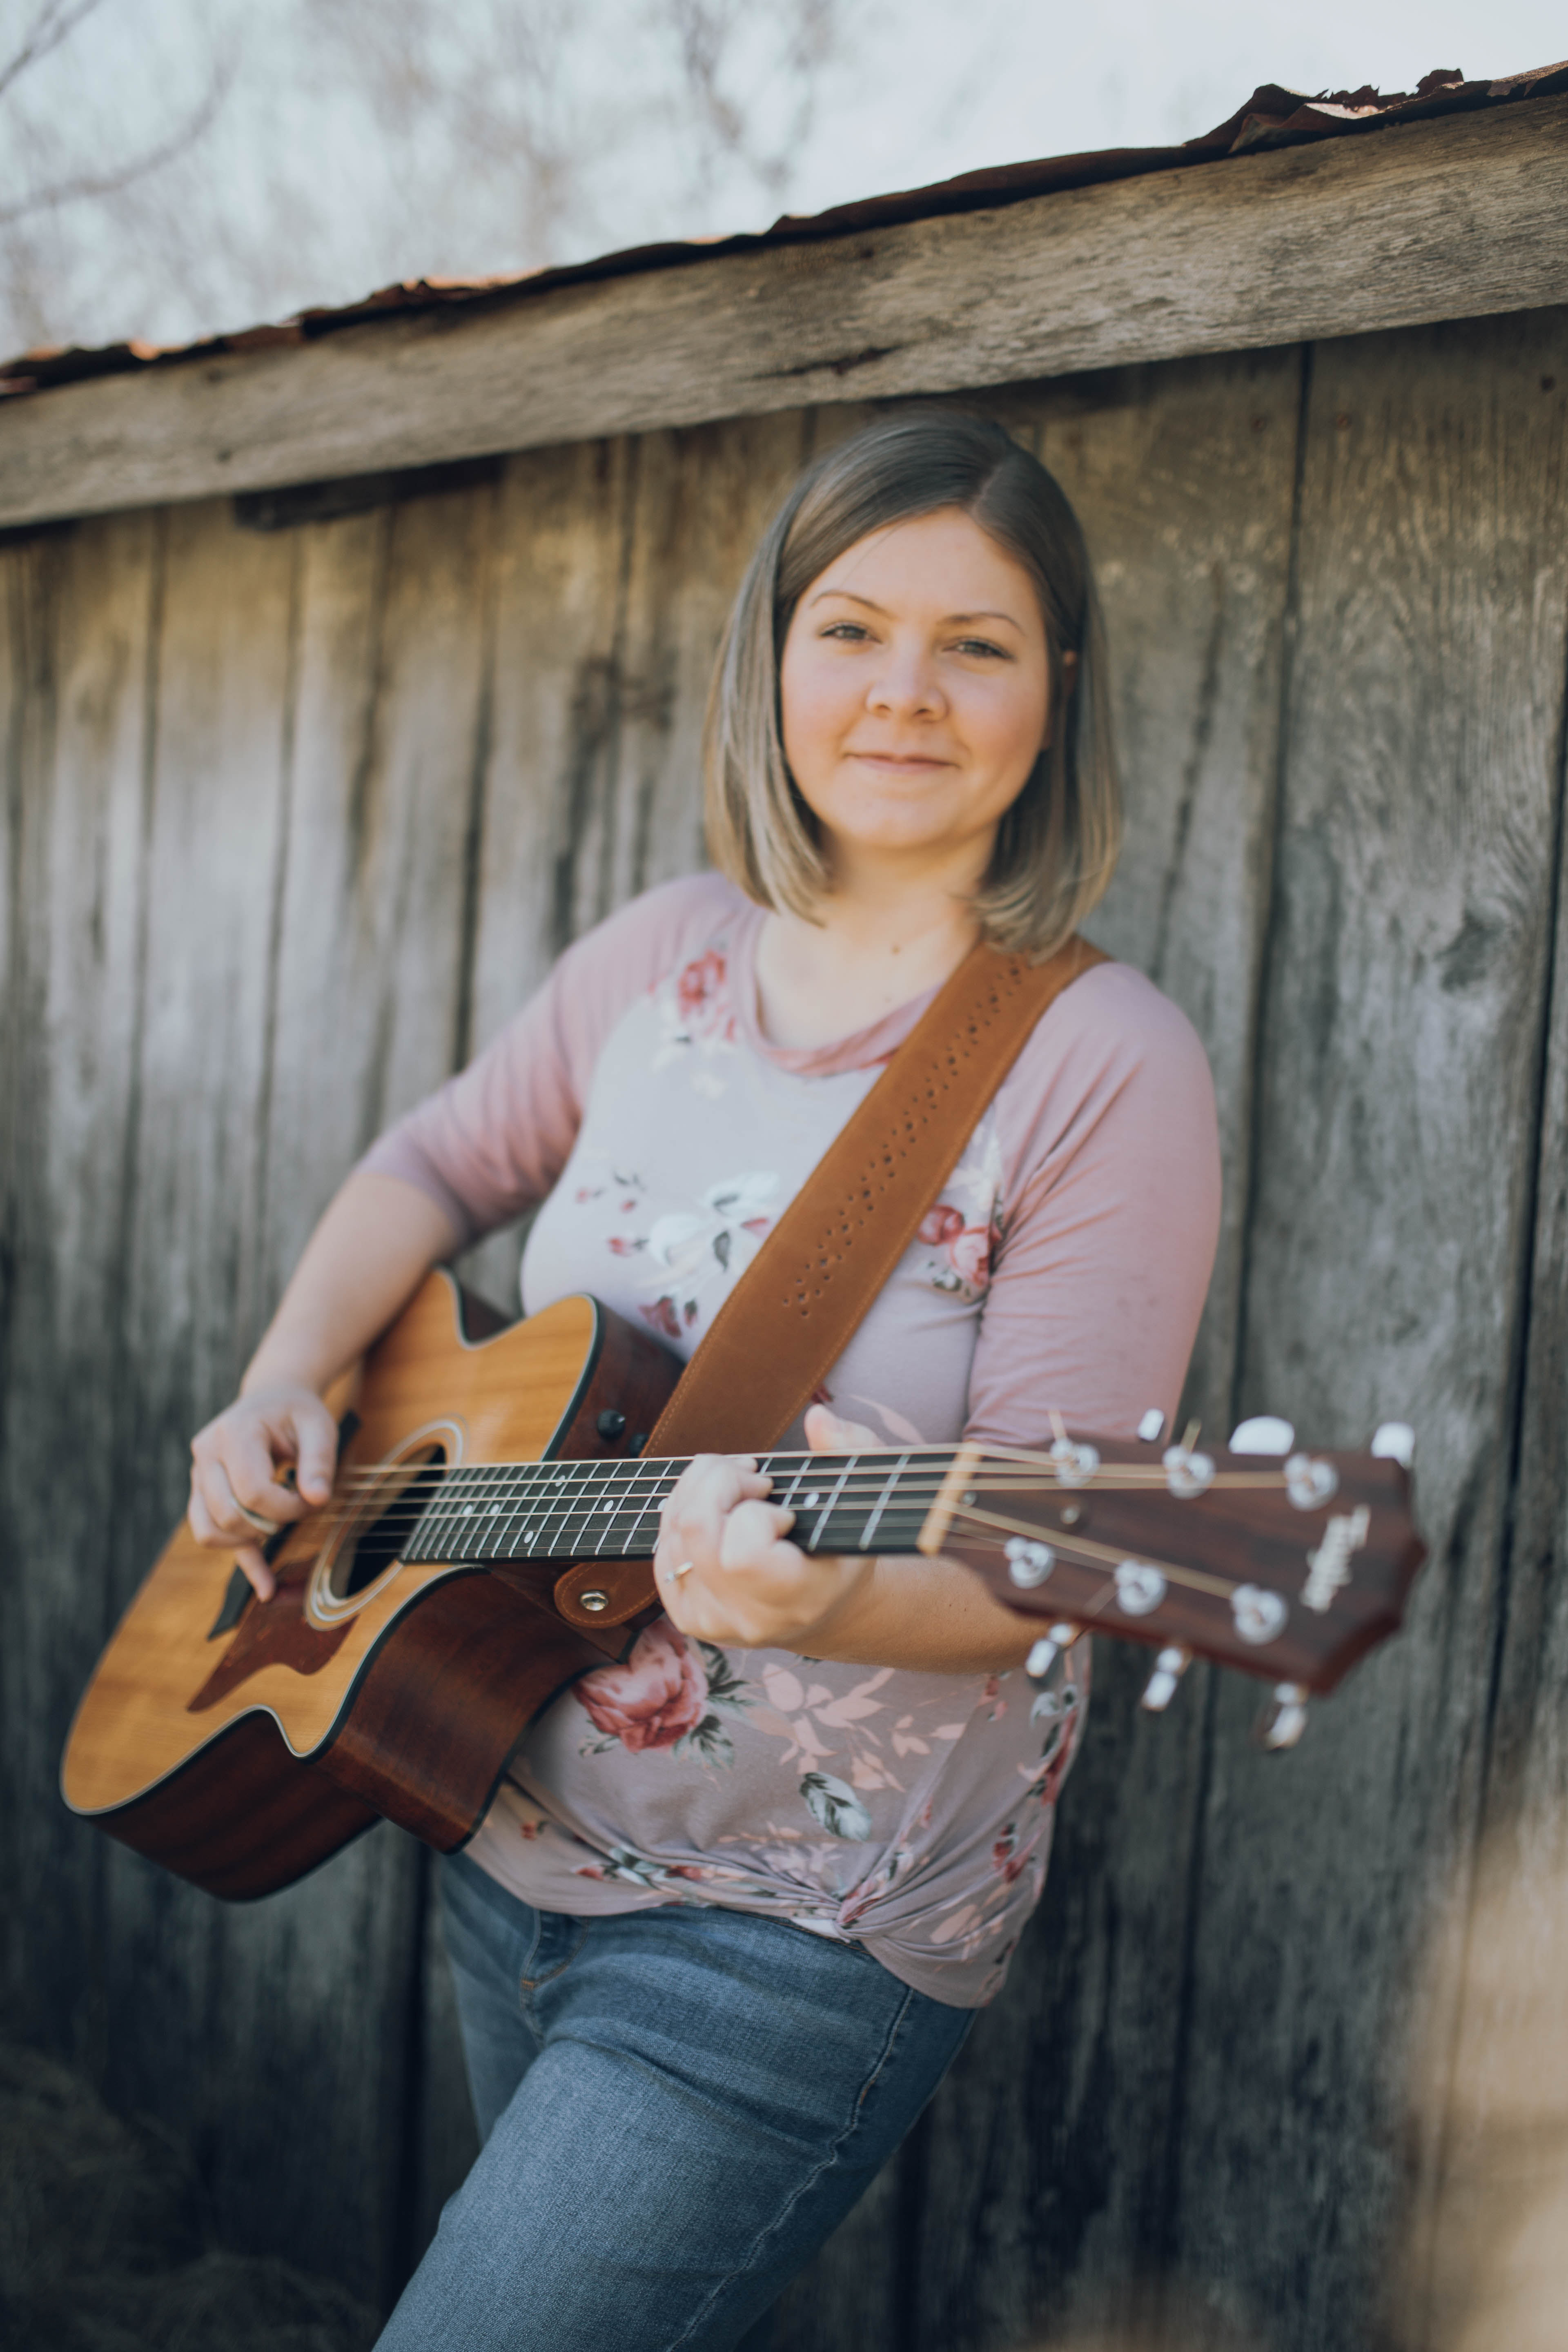 Are you a Christian songwriter wanting to publish and distribute your own music? Get connected with the resources and information you need to get started.